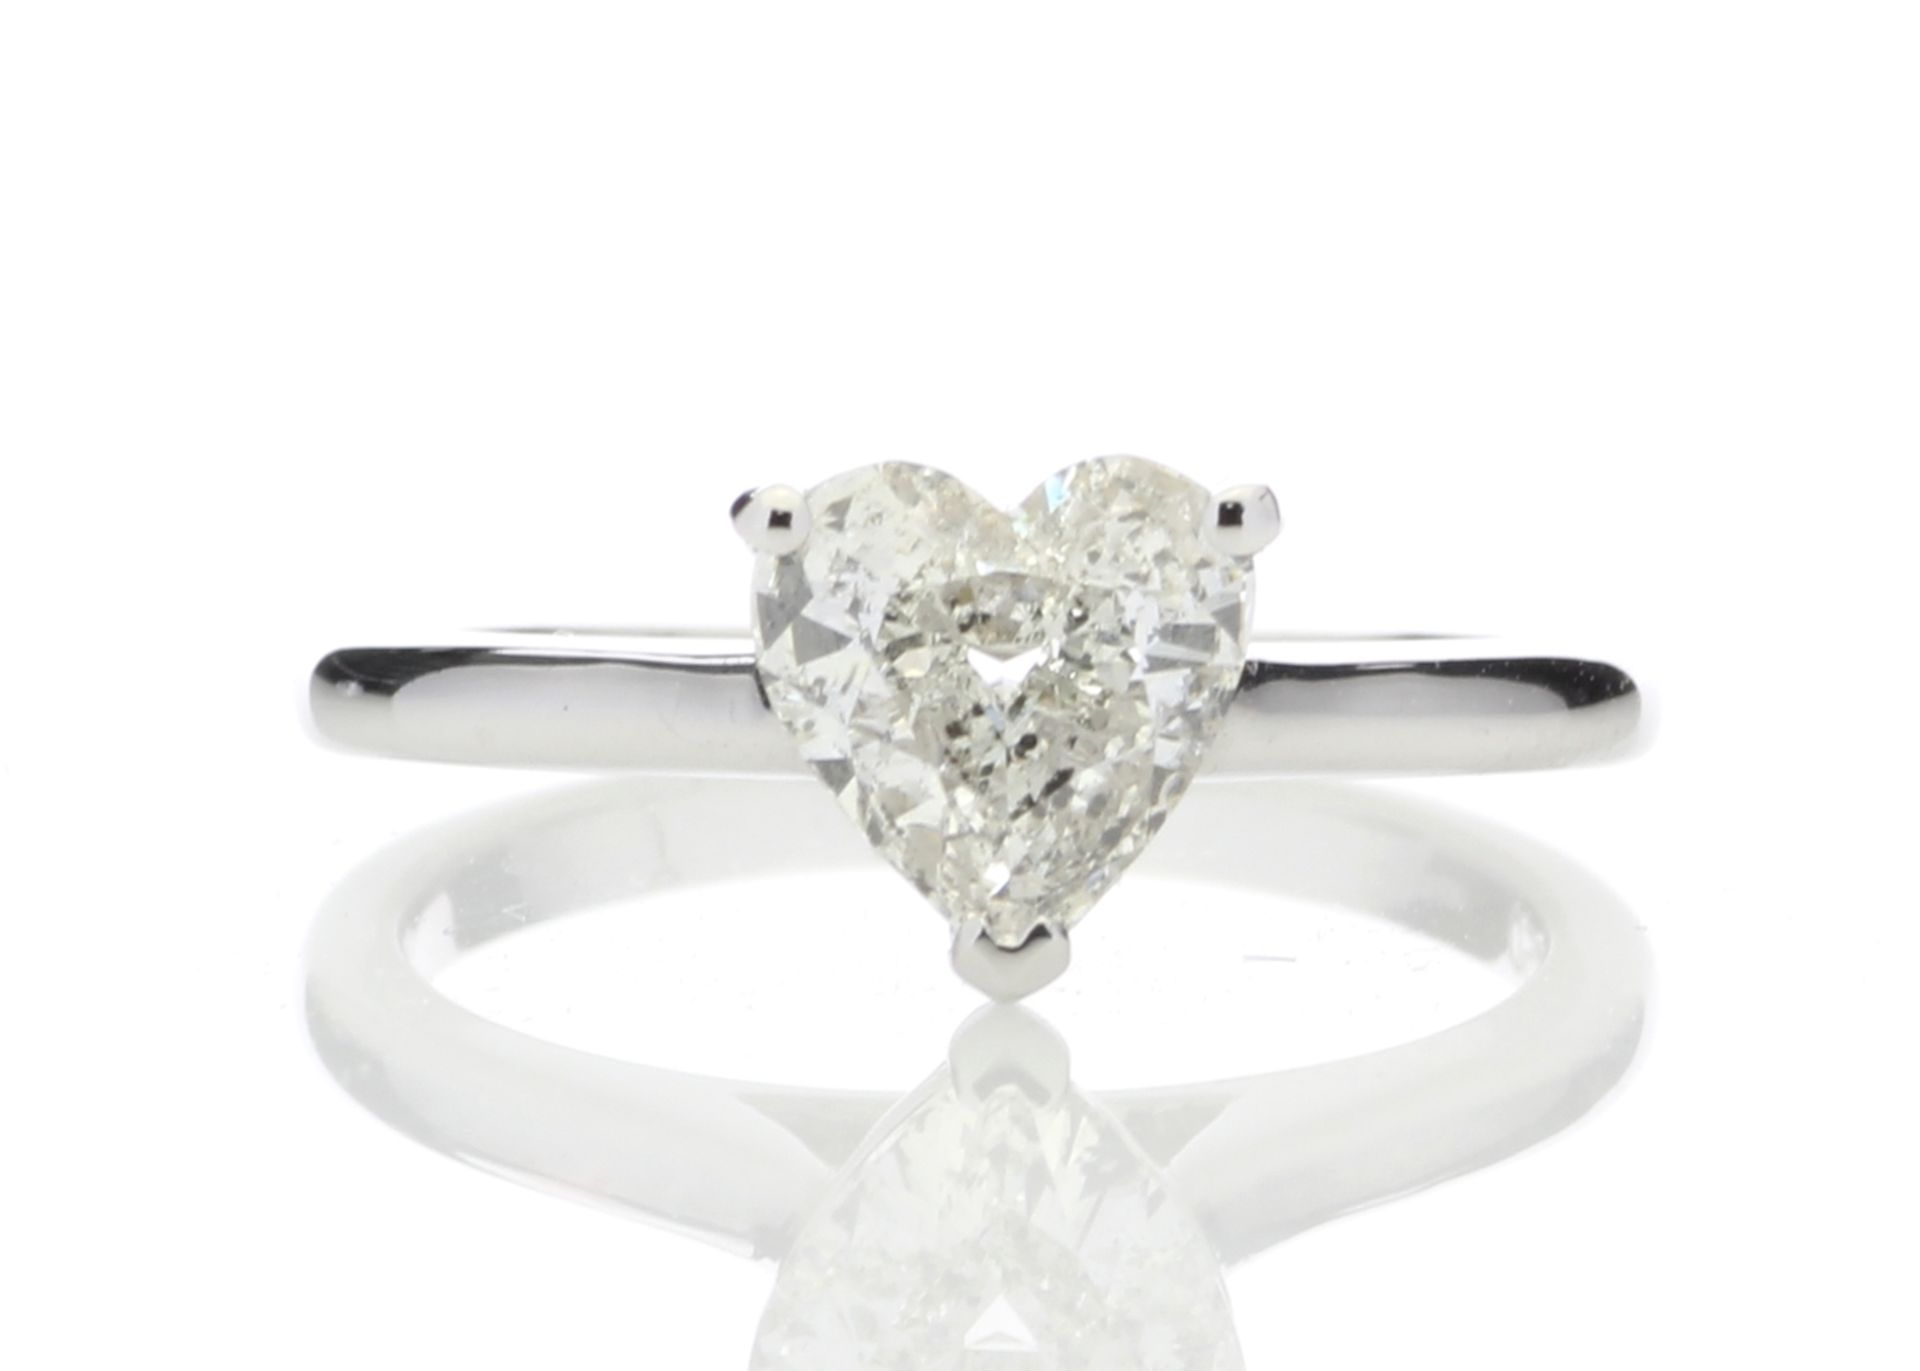 18ct White Gold Single Stone Heart Cut Diamond Ring 1.04 Carats - Valued by GIE £25,950.00 - A